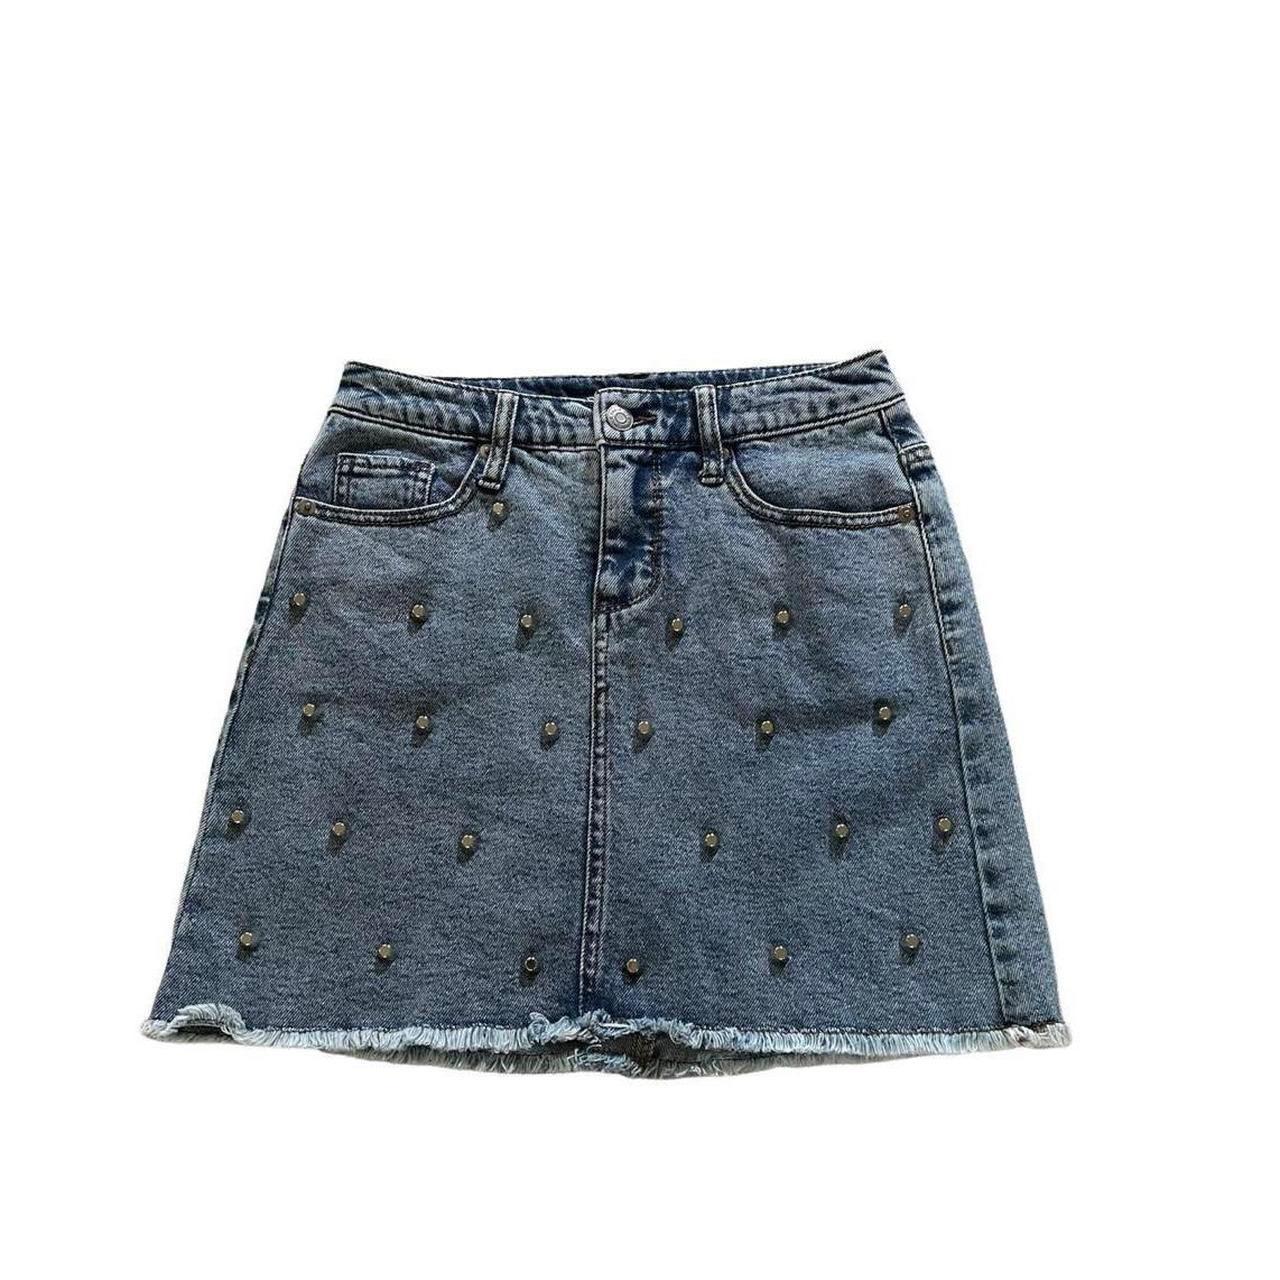 Product Image 1 - Snazzy studded jean mini skirt,zipper